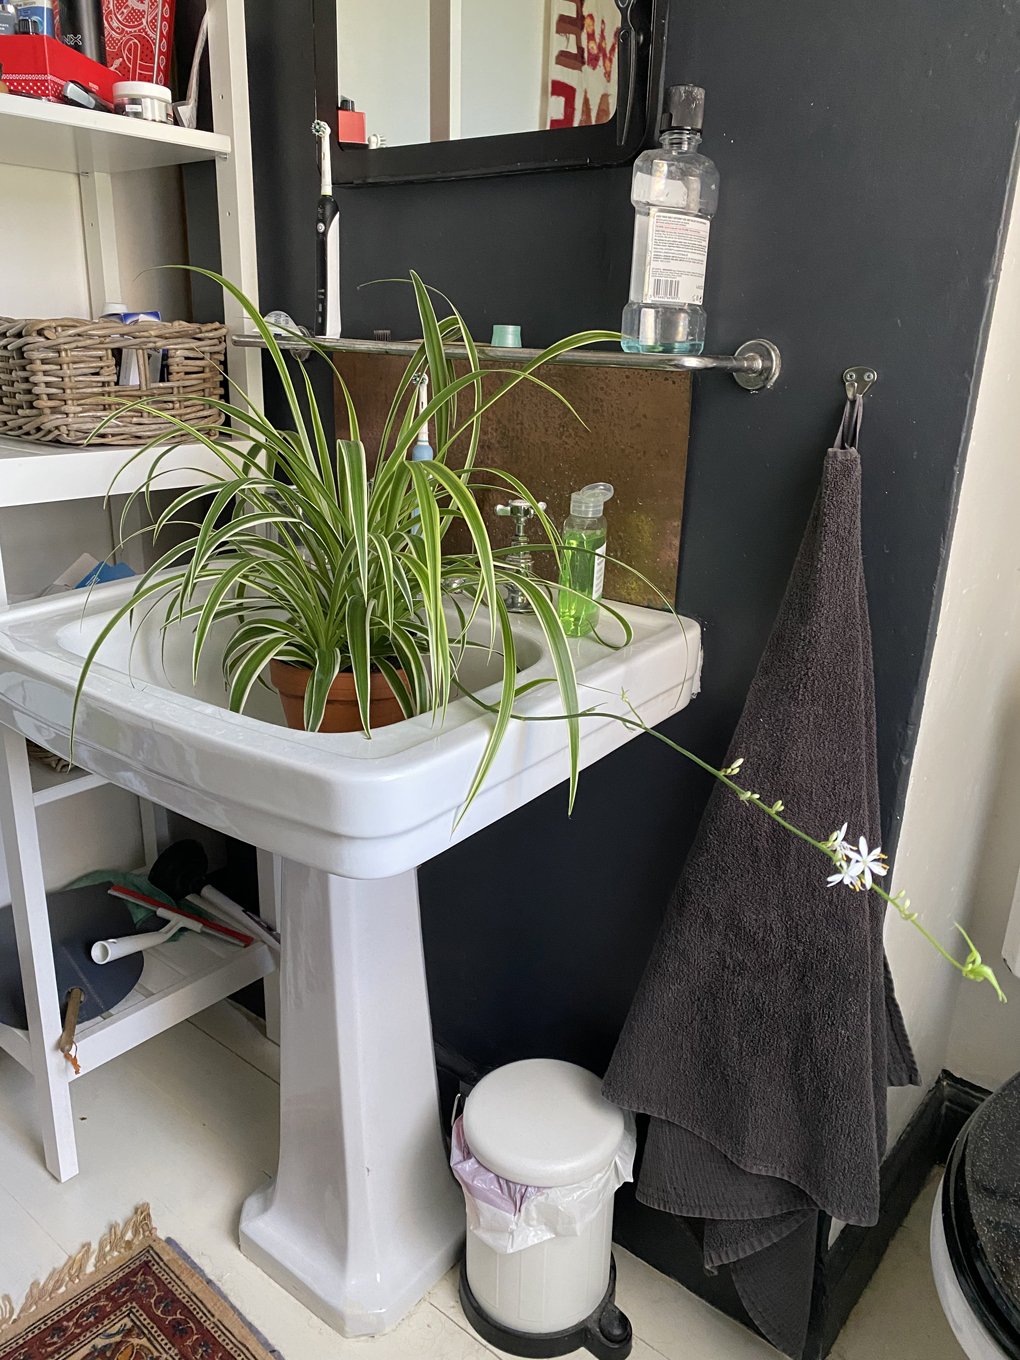 A spider plant sitting in a bathroom sink. One of the spider plants tendrils is stretching out across the bathroom in search of the sun.